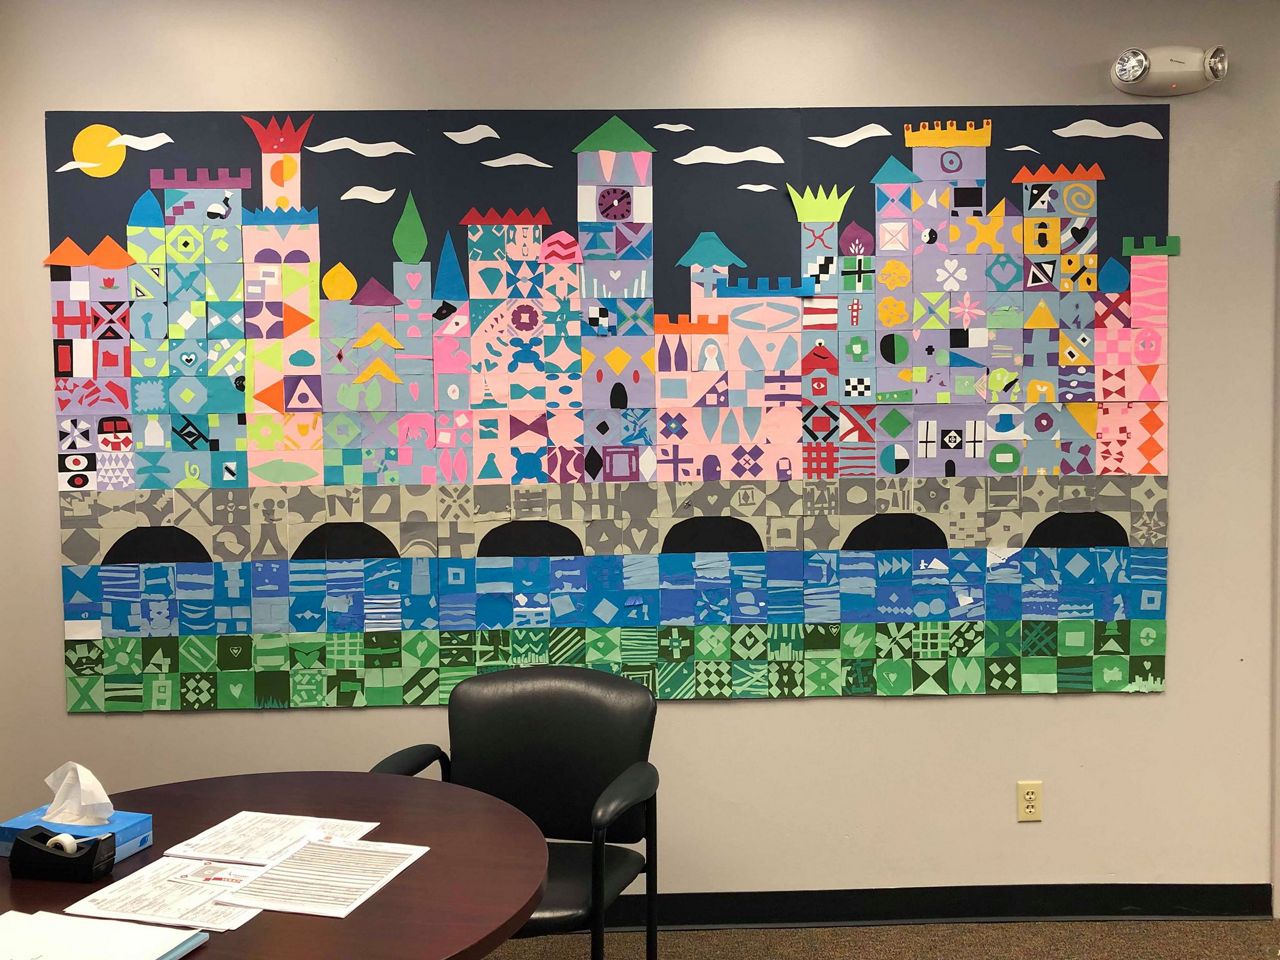 A mosaic created from squares designed by every student at Bay Meadows Elementary School in Orange County. (Krista Ollendorf, Viewer)